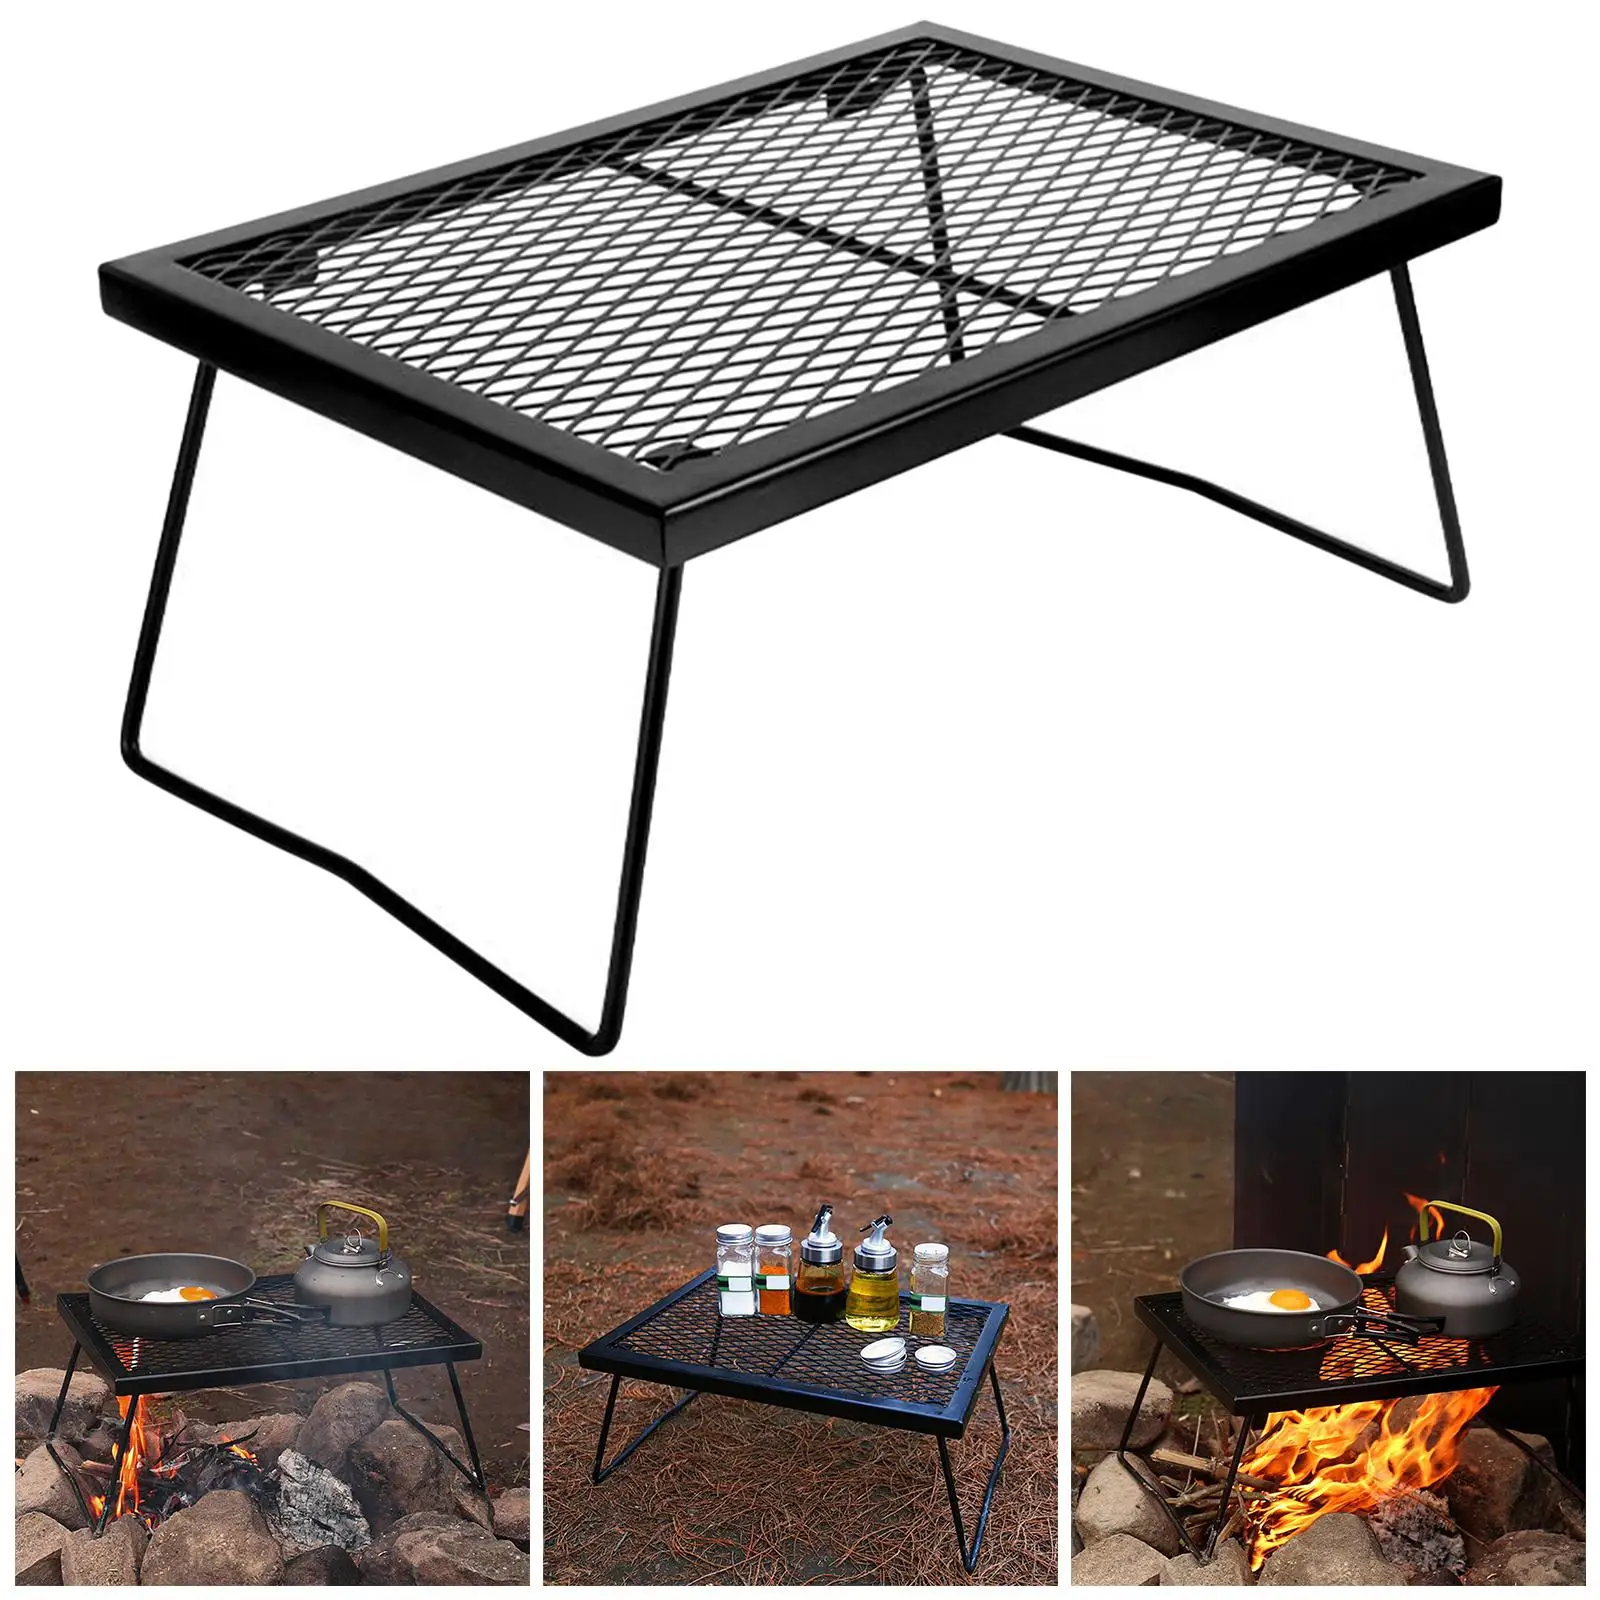 Poring BBQ Table Grill Plate Outdoor Folding Rack for Camping Beach Outdoor Backyard